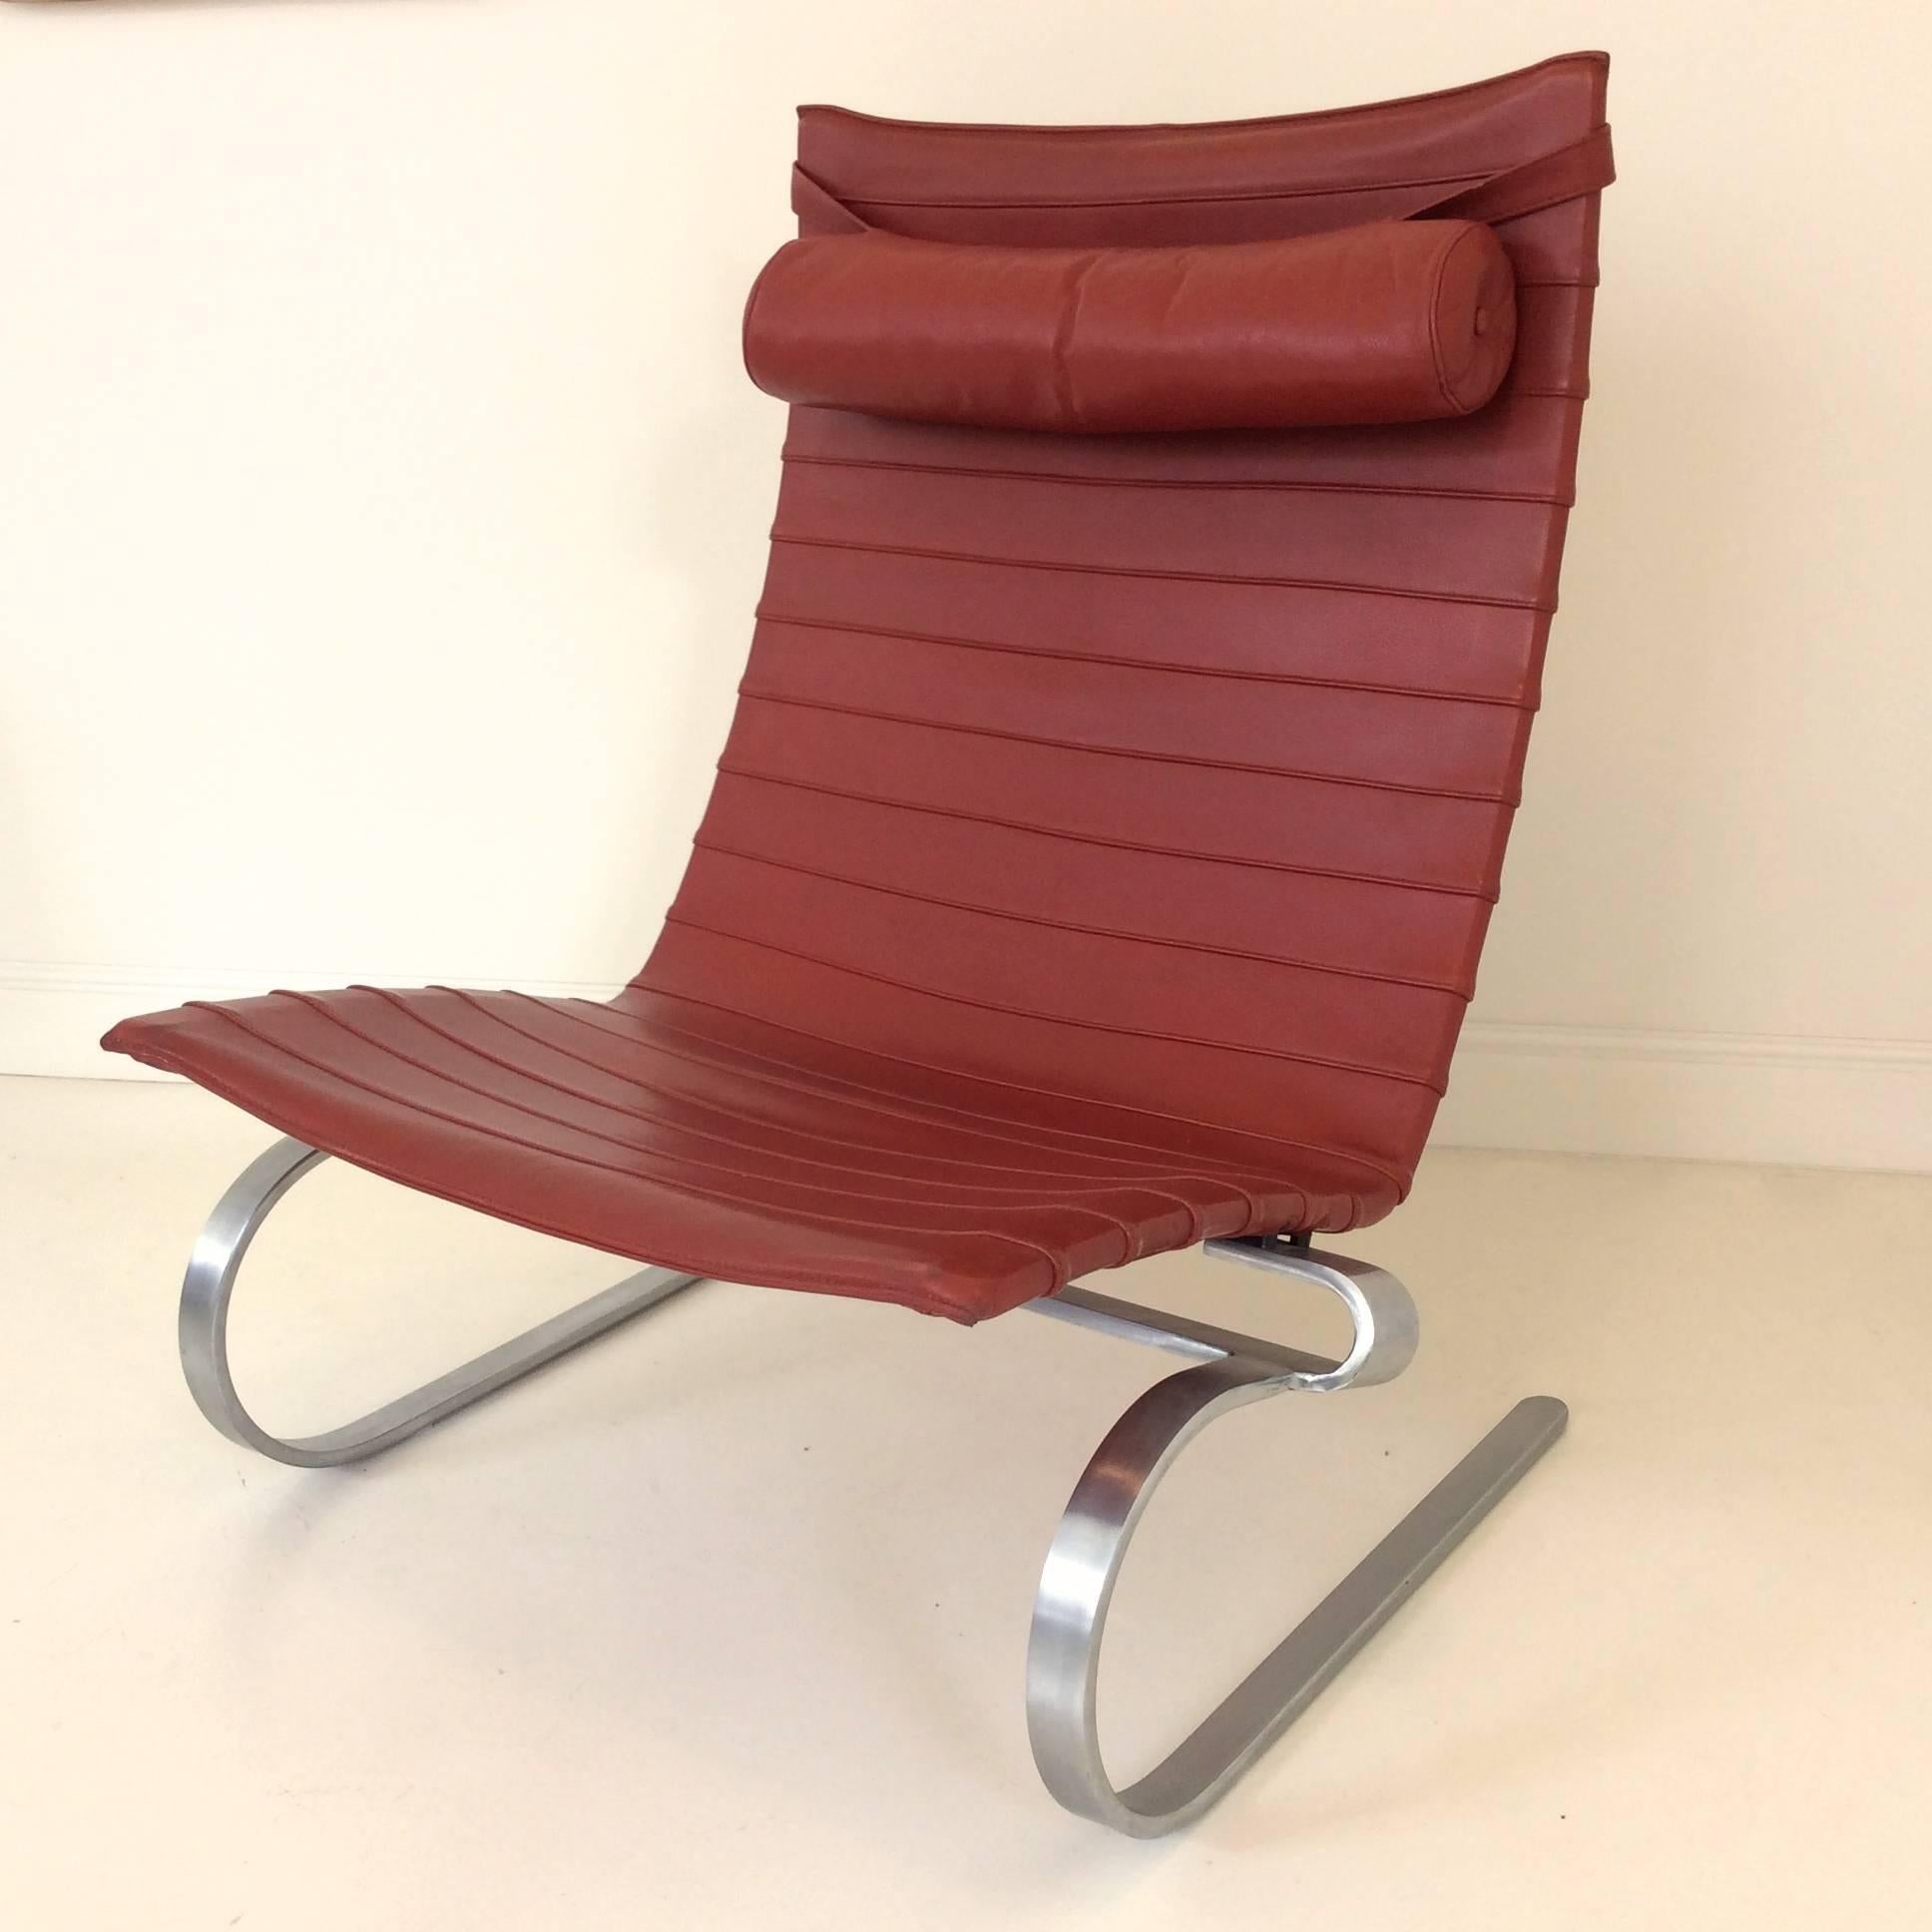 Nice PK-20 leather lounge chair designed in 1968 by Poul Kjærholm.
Fritz Hansen edition label underneath, circa 1980. 
Original cognac leather, Nickel-plated steel base. Head pillow.
Measures: H 81 cm, D 70 cm, W 80 cm, seat height 35 cm.
Good